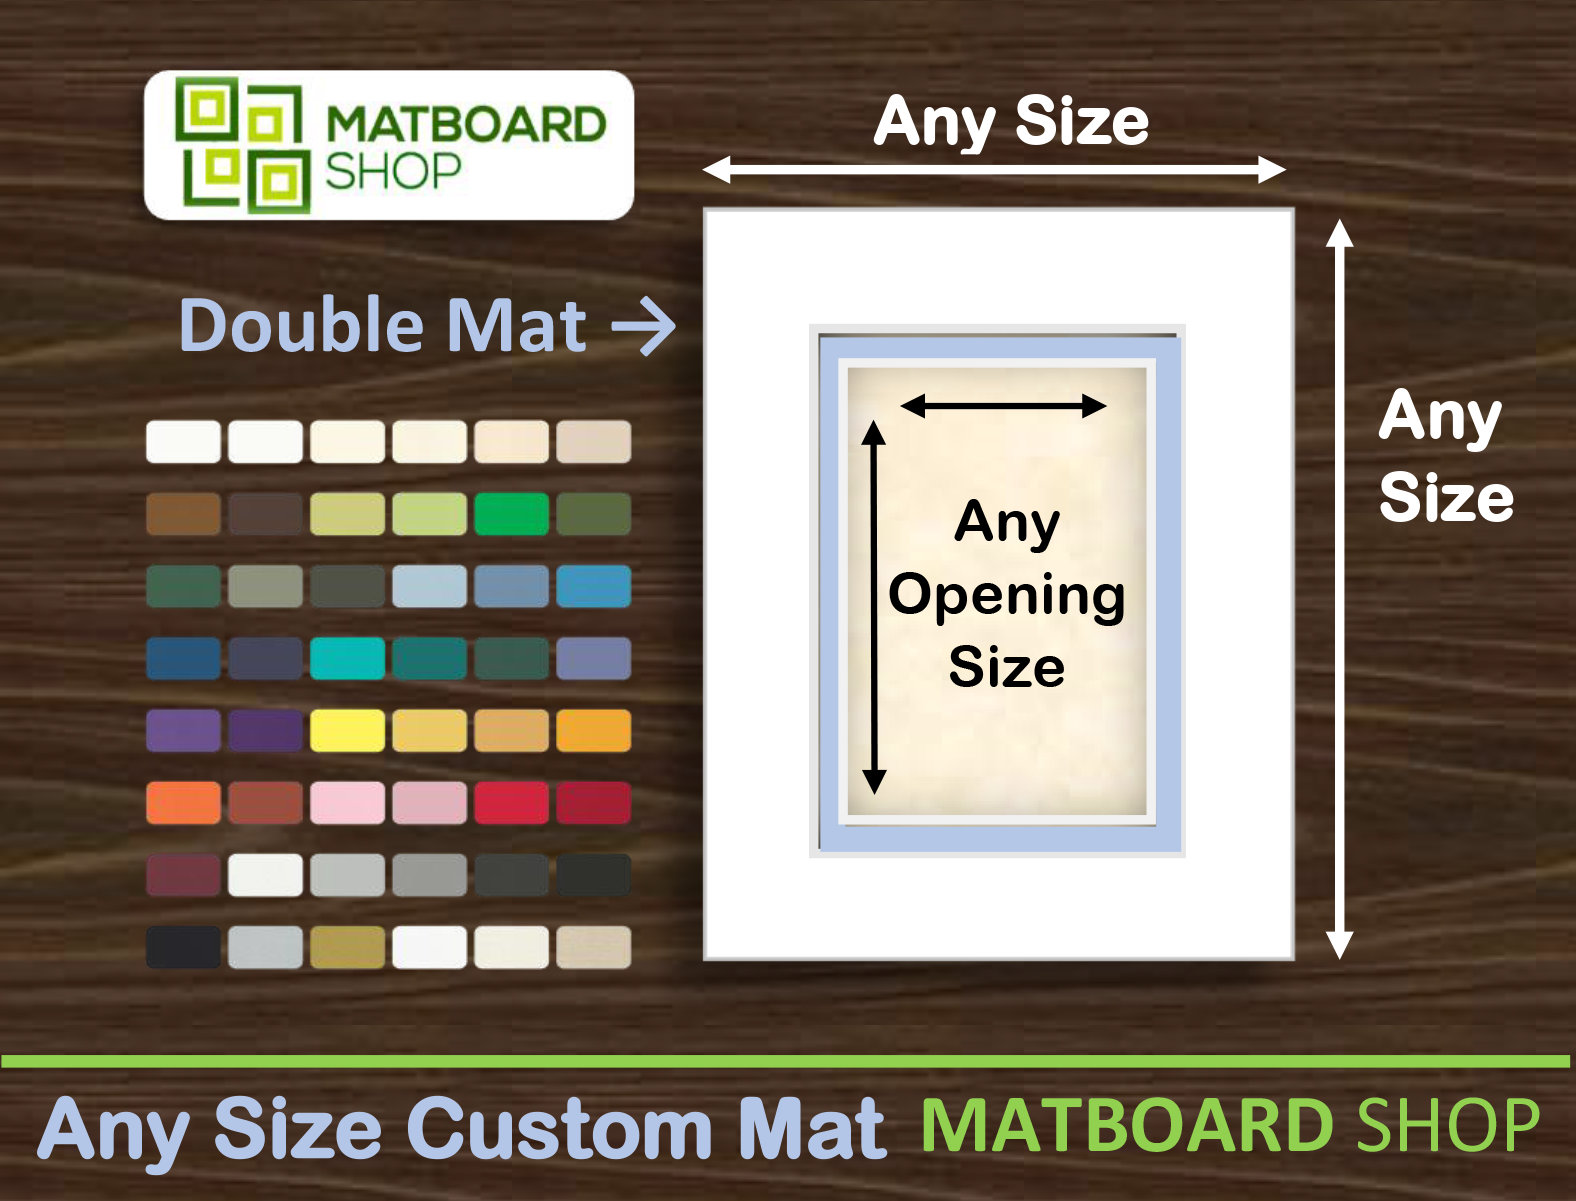 11x14 Maple Picture Frame, Matted to 8x10, Thin Wood Edge, Gallery Style,  Simple, Minimal, Custom Mat Opening Available 